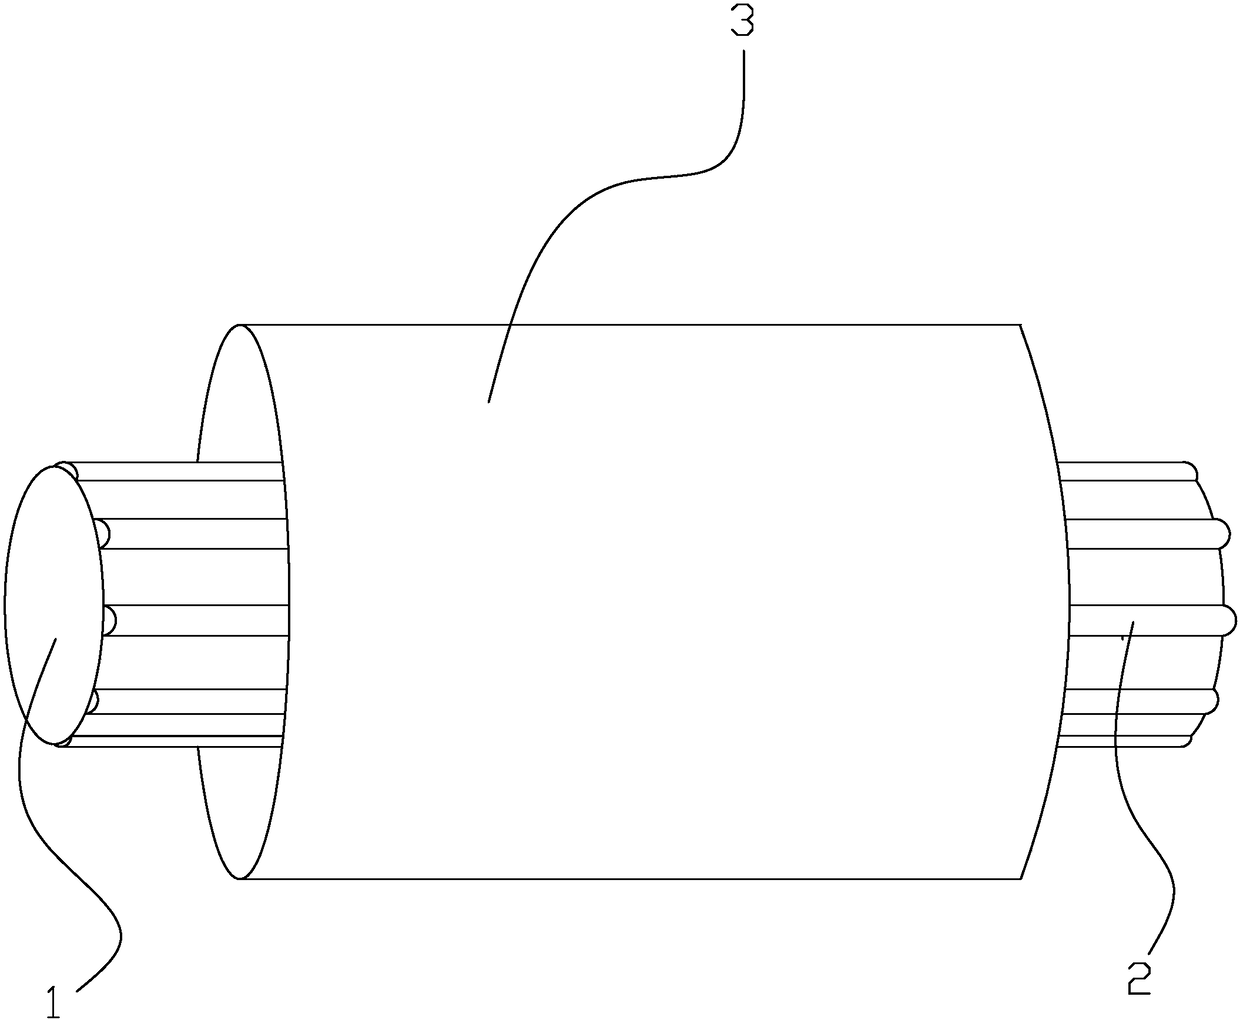 Improving the heat shrinking process and heat shrinking device of the wavy edge of the diaphragm